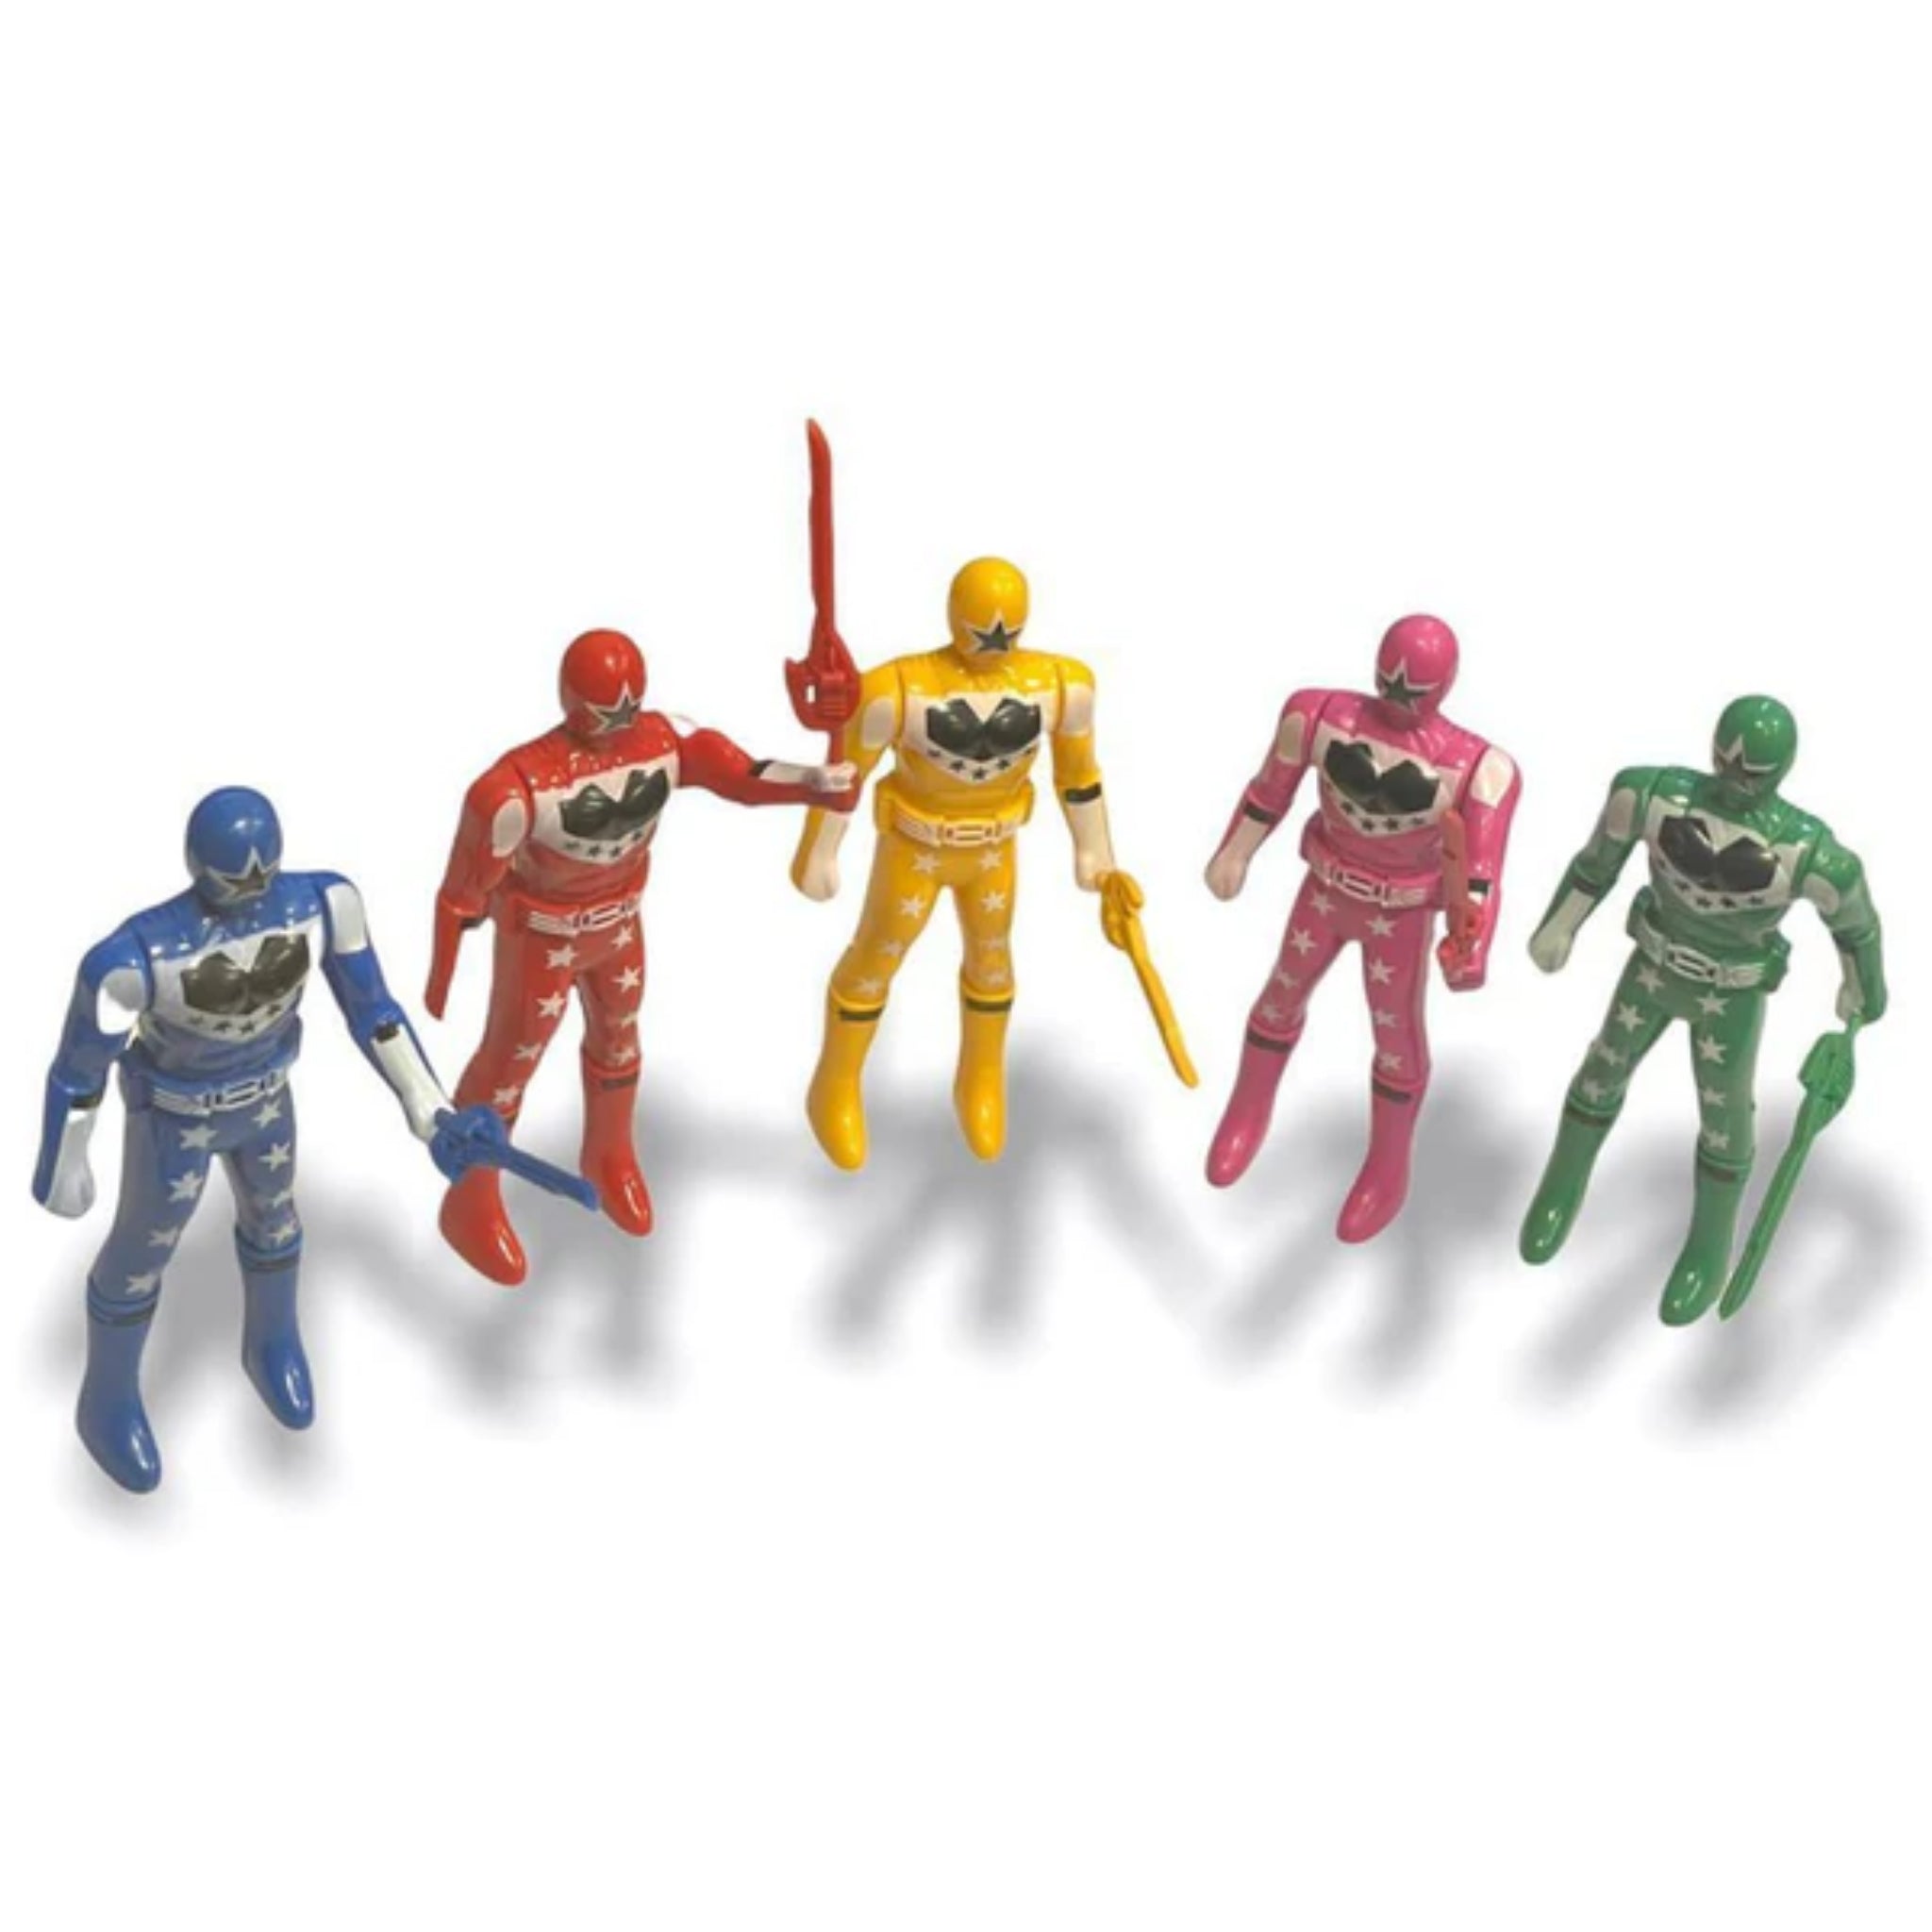 Beclen Harp 5Pcs Kids Space Heroes Action Figures In Blister Pack Party Bag Filler Kandytoys